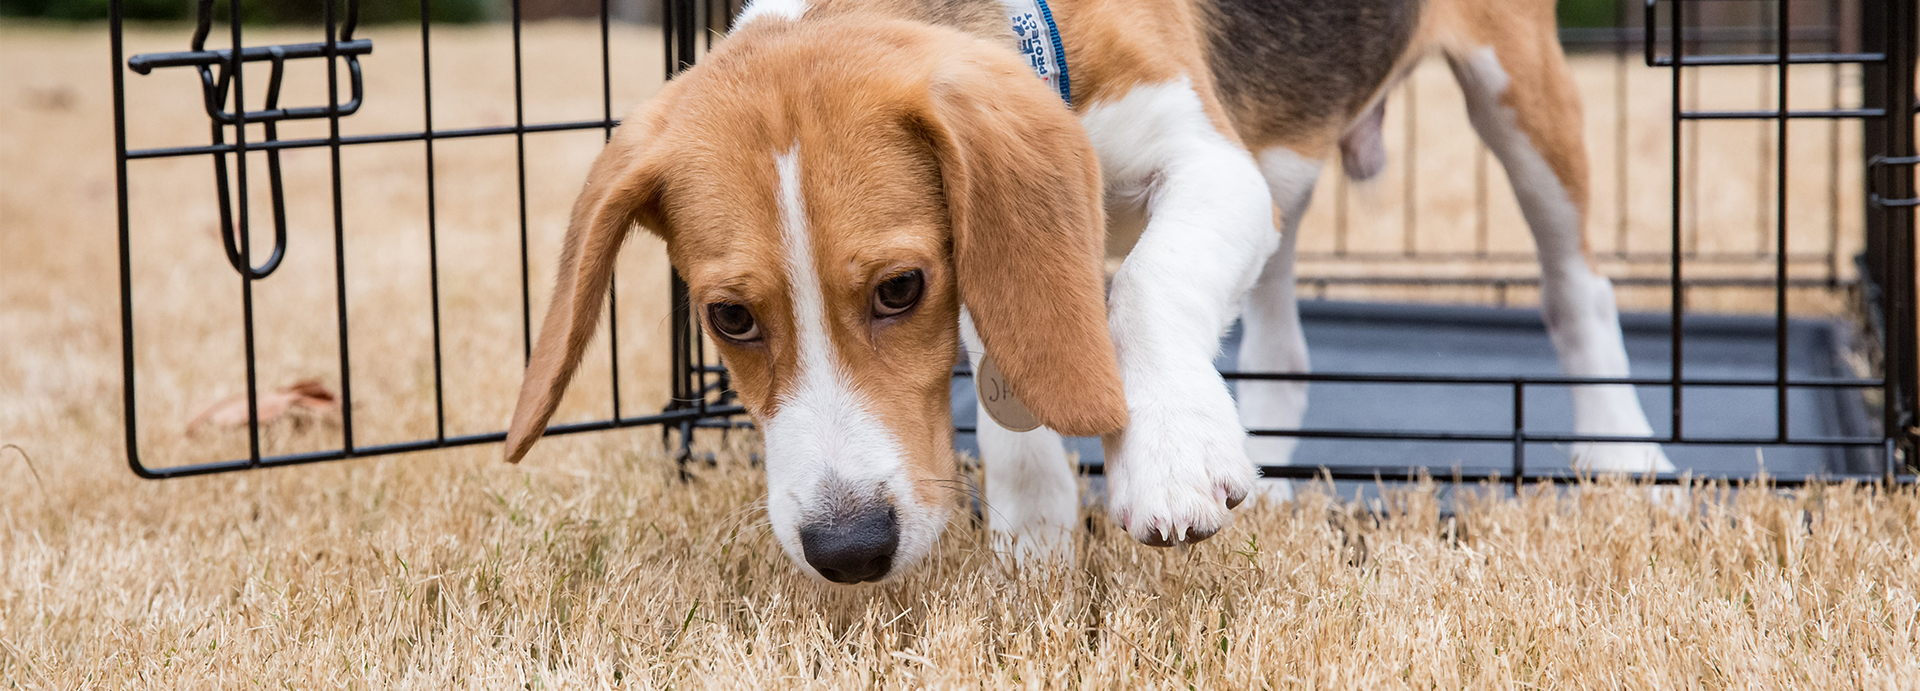 Beagles Take First Steps of Freedom After Being Rescued From Overseas Lab